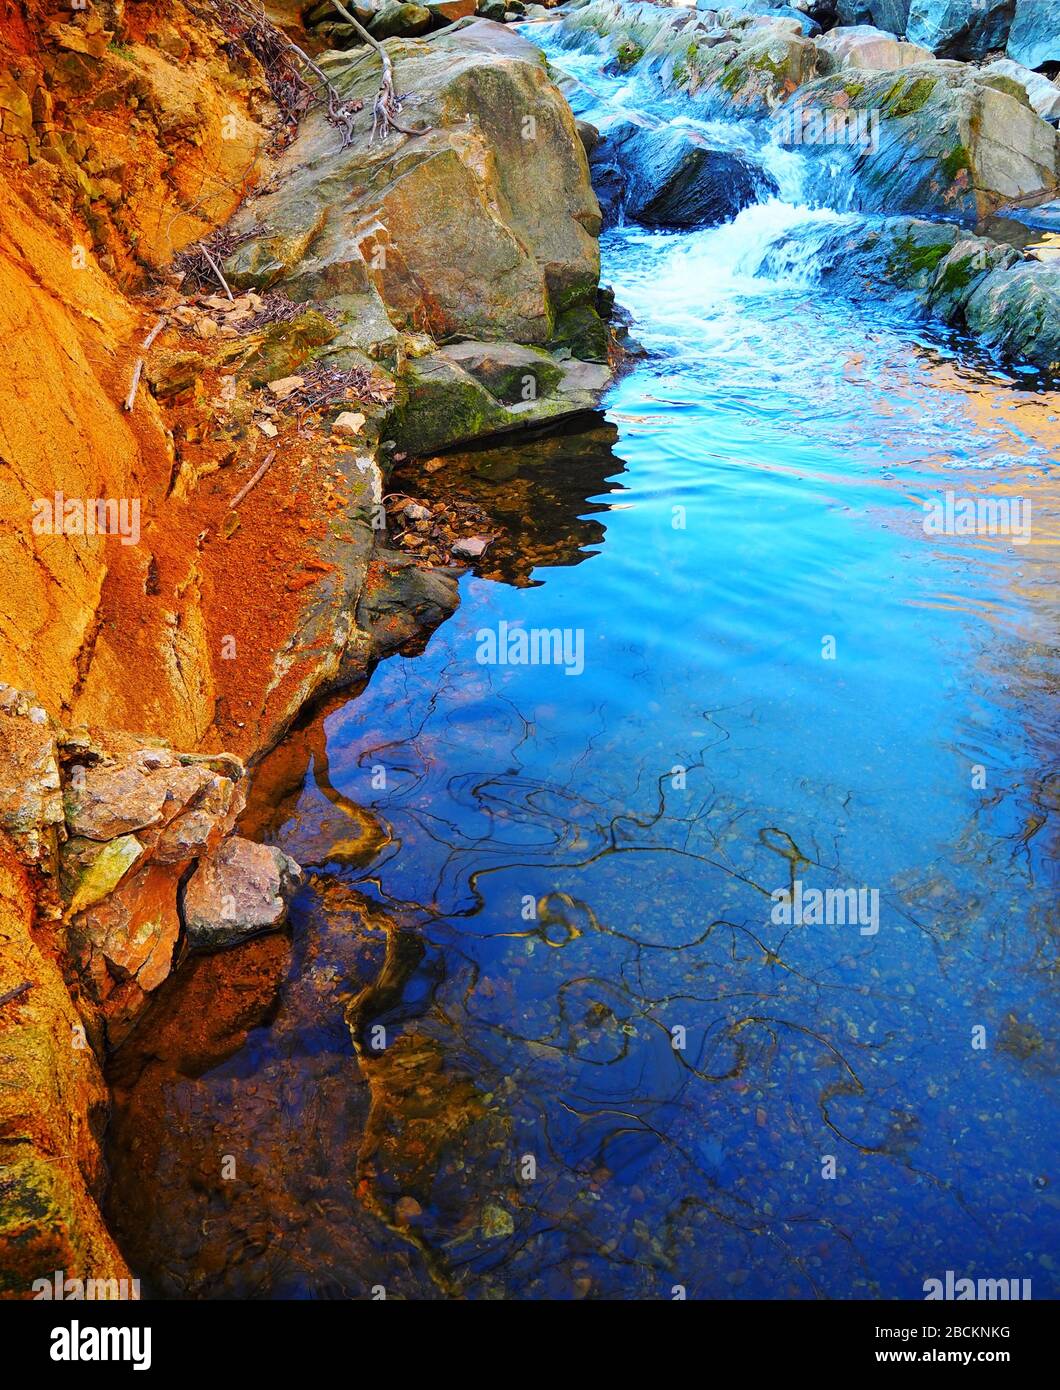 A vibrant blue pool of water reflects twisting tree branches just below some rapids in a stream with big moss coverd rocks on a bright winter day. Stock Photo